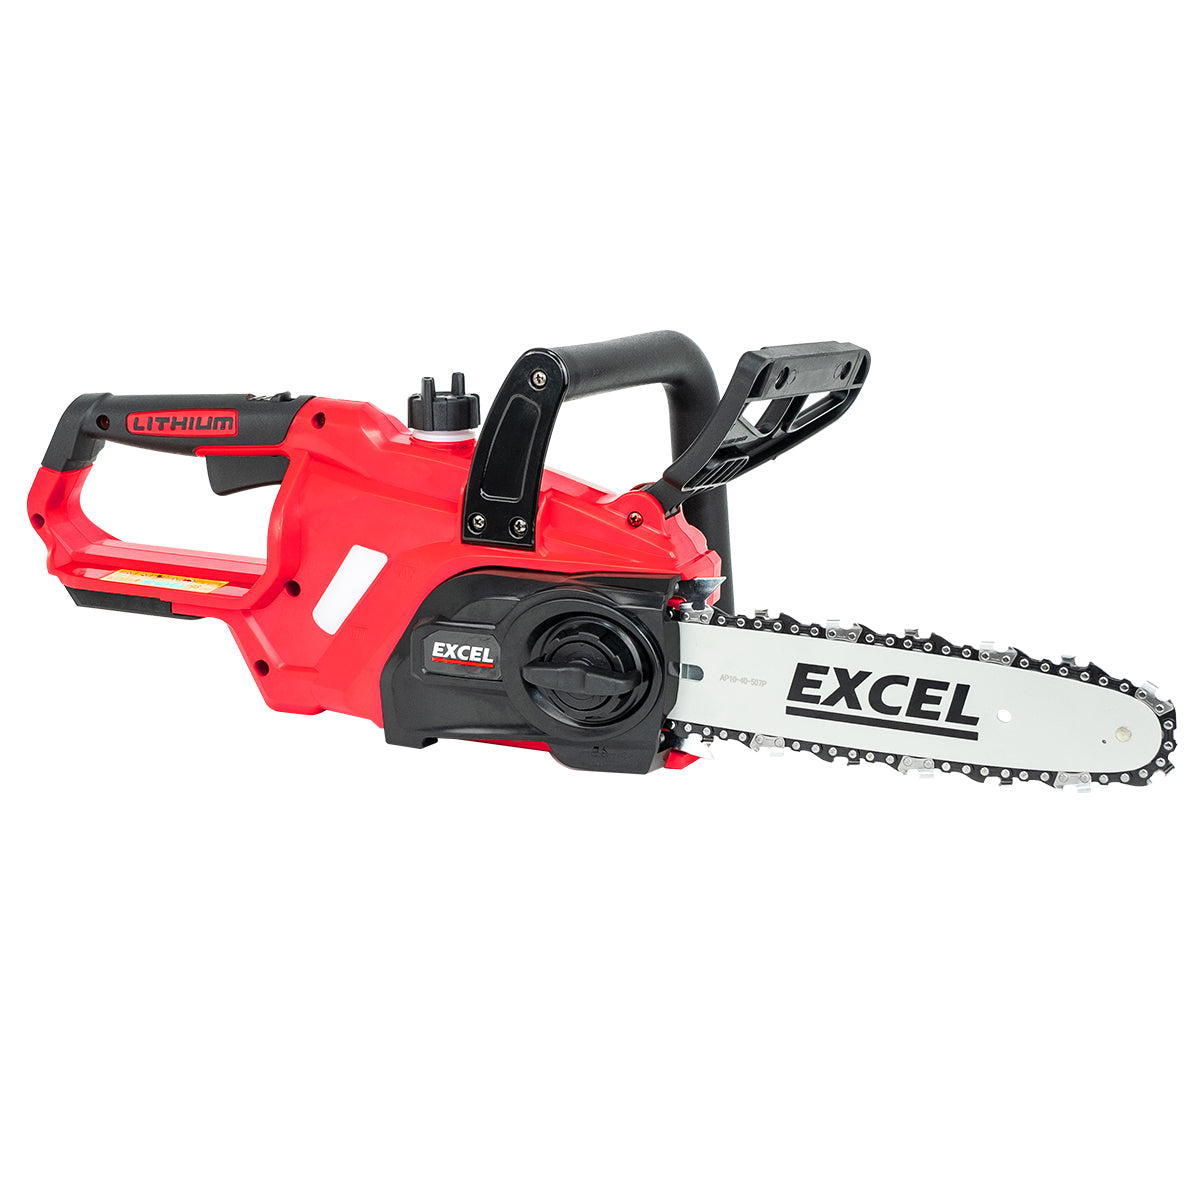 Excel 18V 245mm Chainsaw Wood Cutter Body Only (No Battery & Charger)